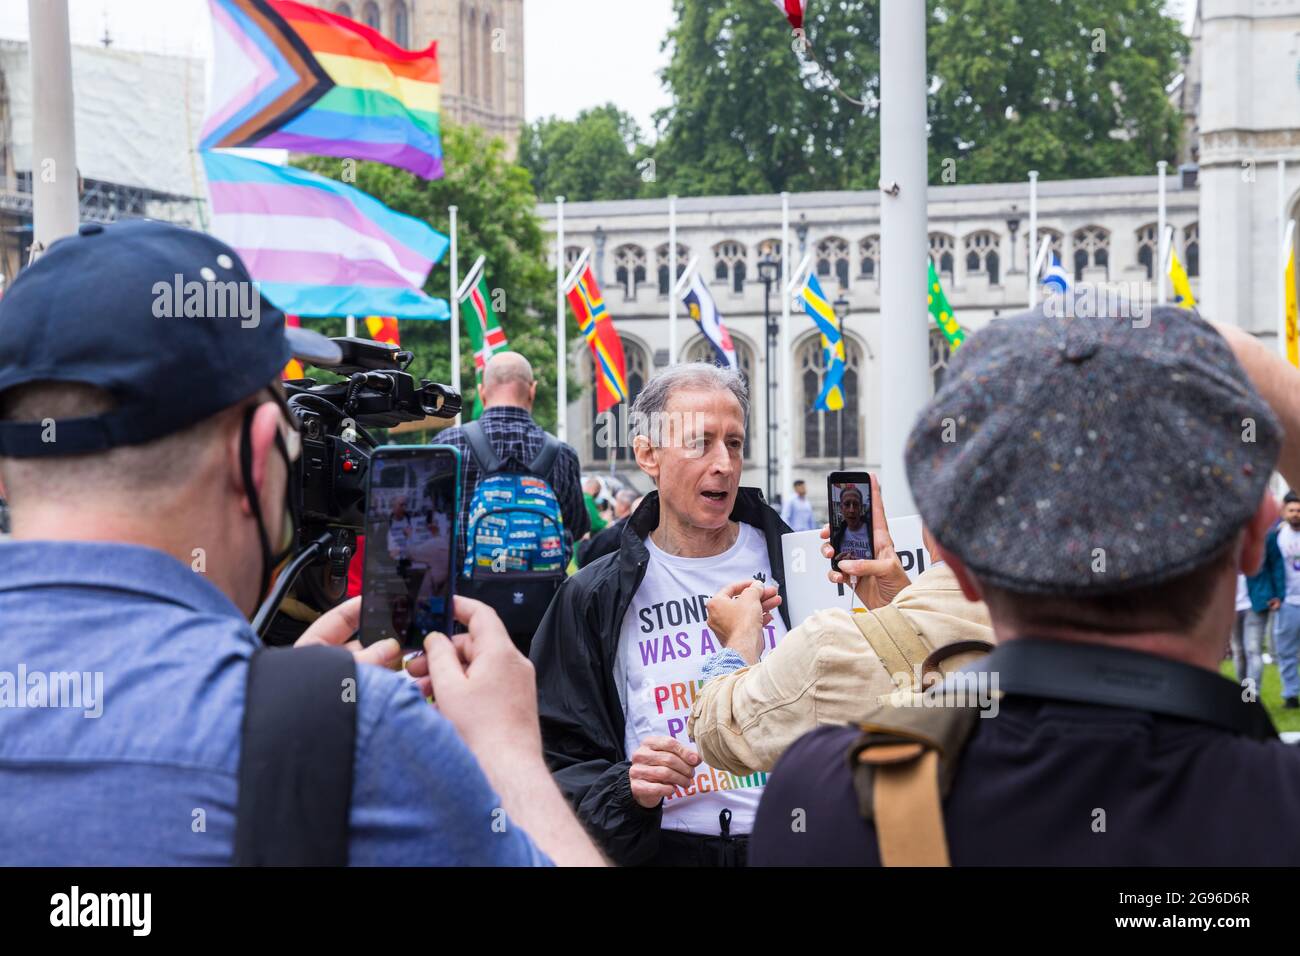 Peter Tatchell speaking at the Reclaim Pride protest, London Stock Photo